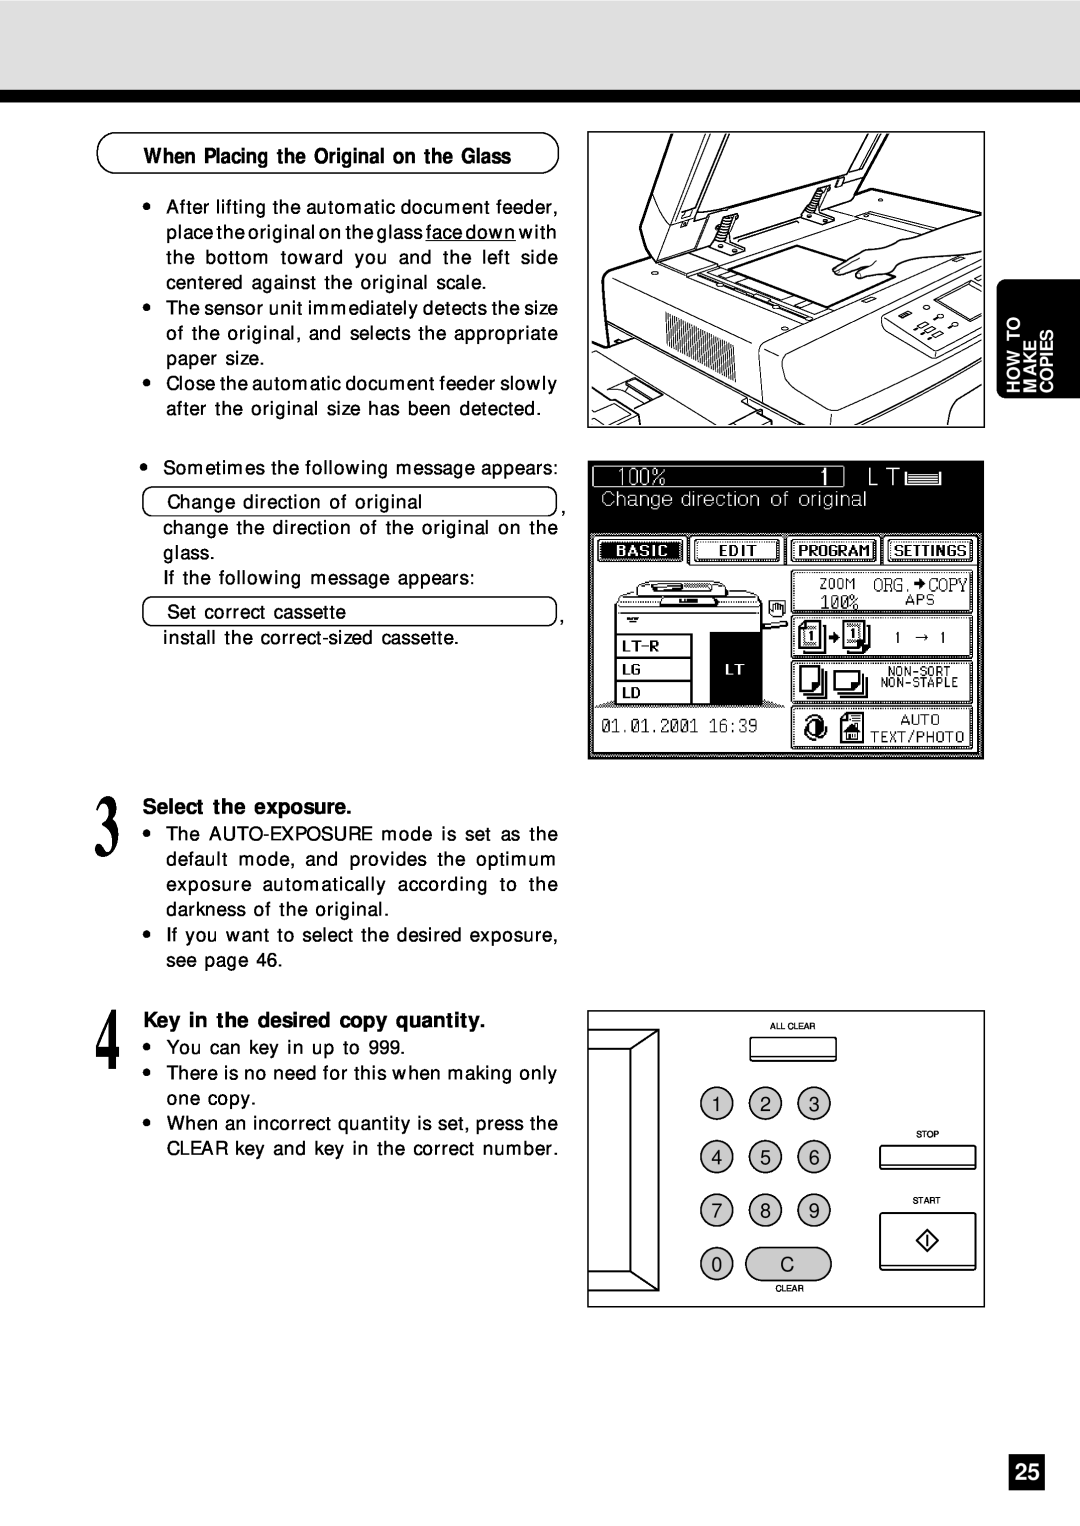 Sharp AR-650 operation manual Select the exposure, Key in the desired copy quantity, When Placing the Original on the Glass 